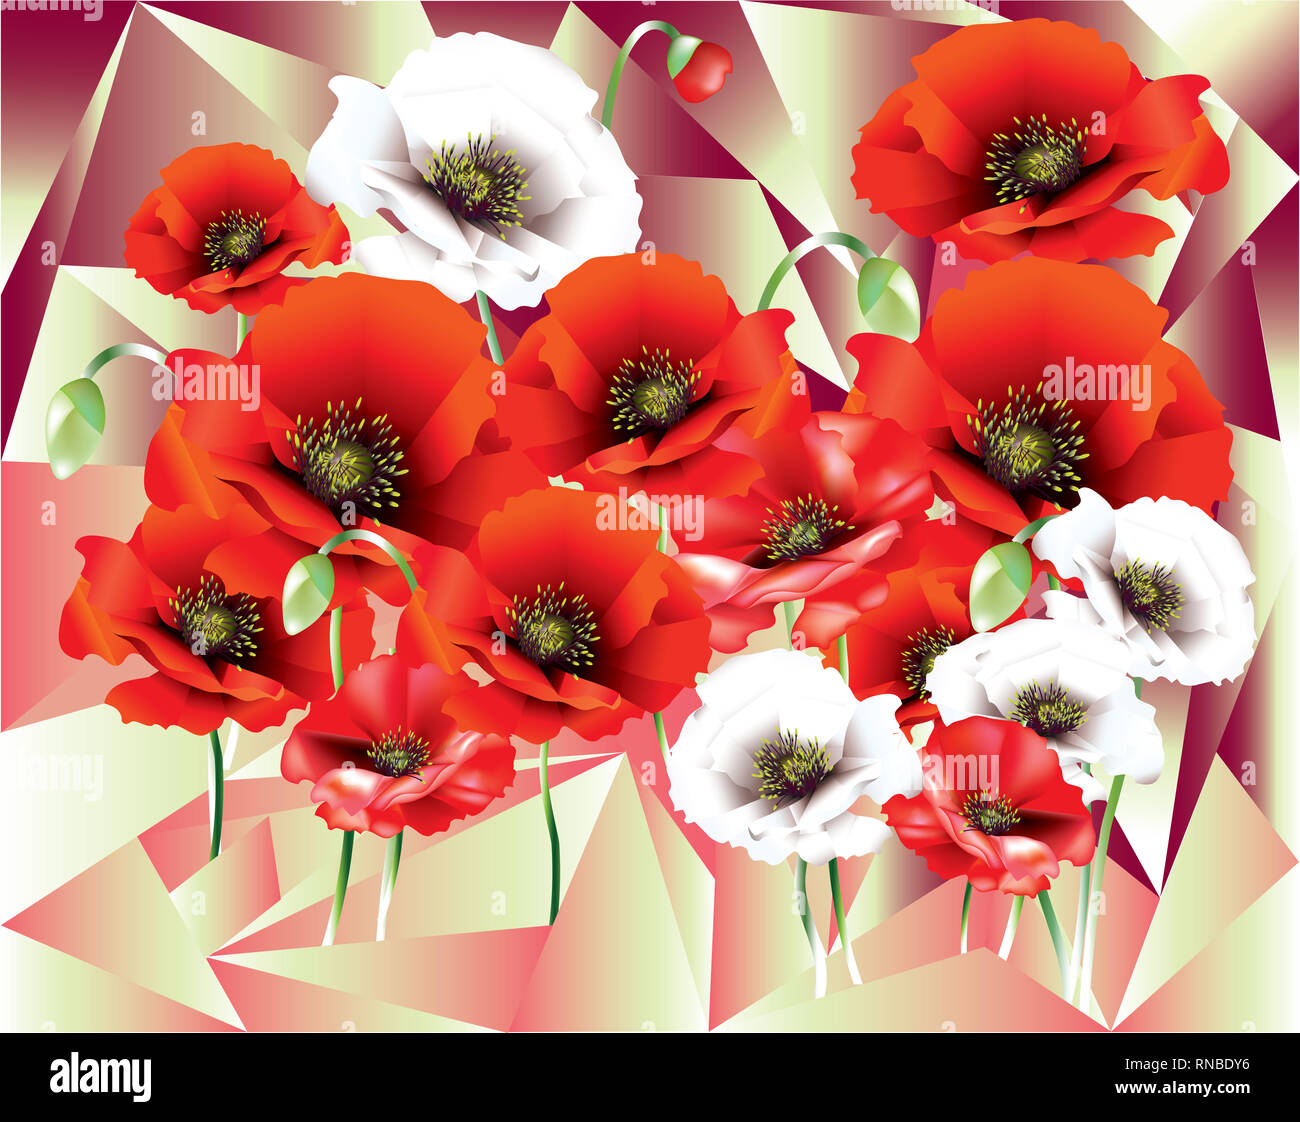 Colorful Poppies on cubism background Stock Photo - Alamy